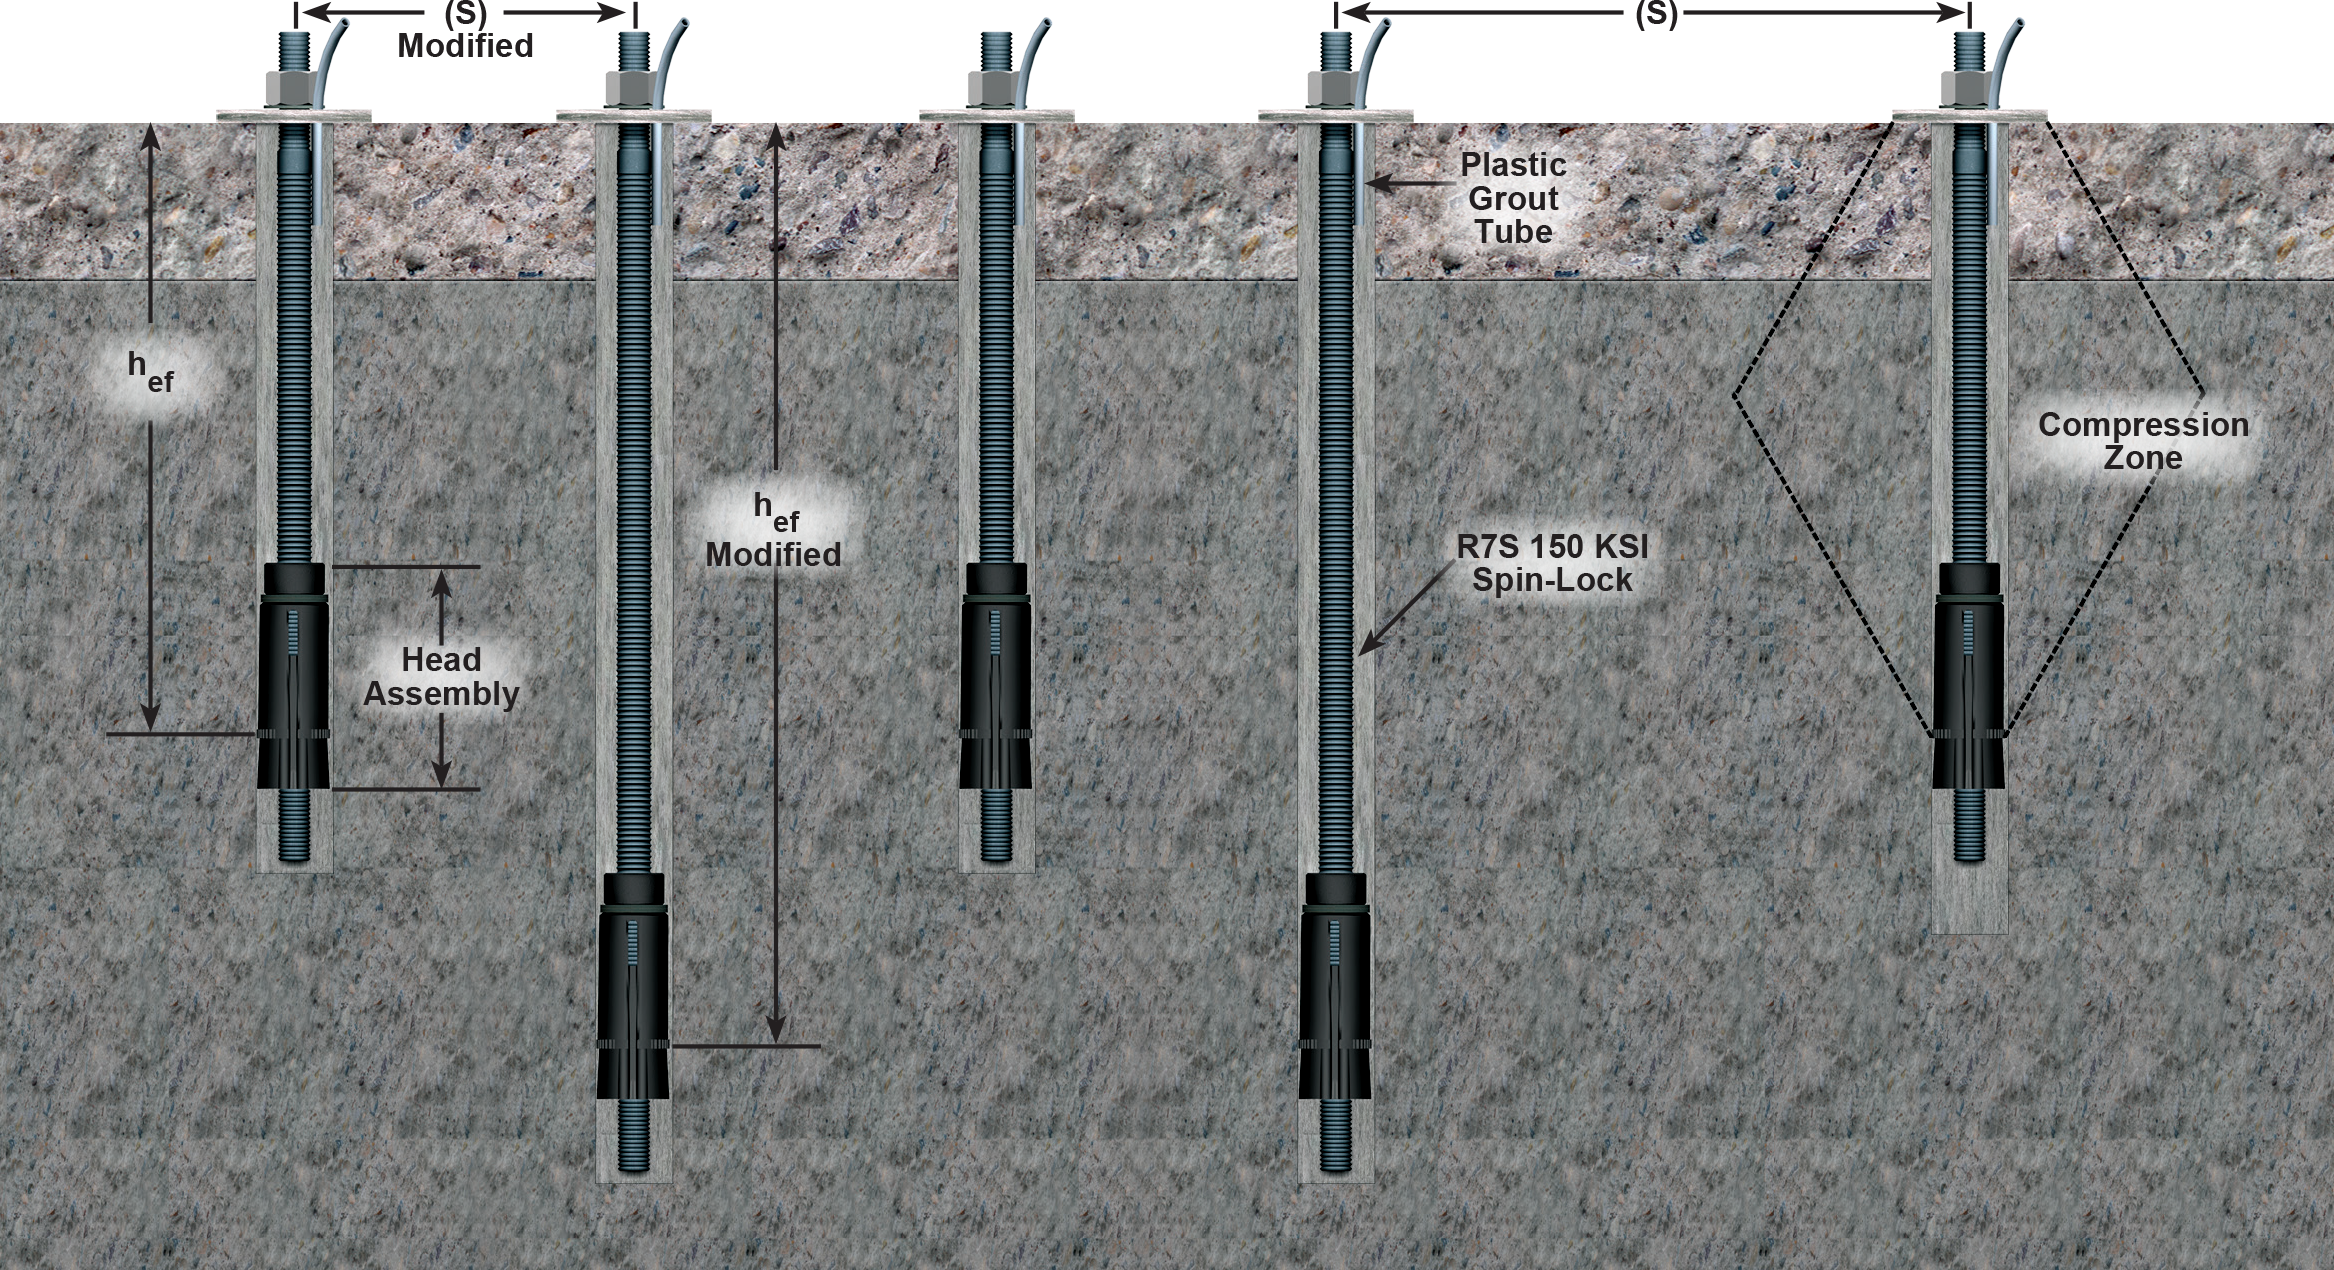 spin-lock concrete anchors